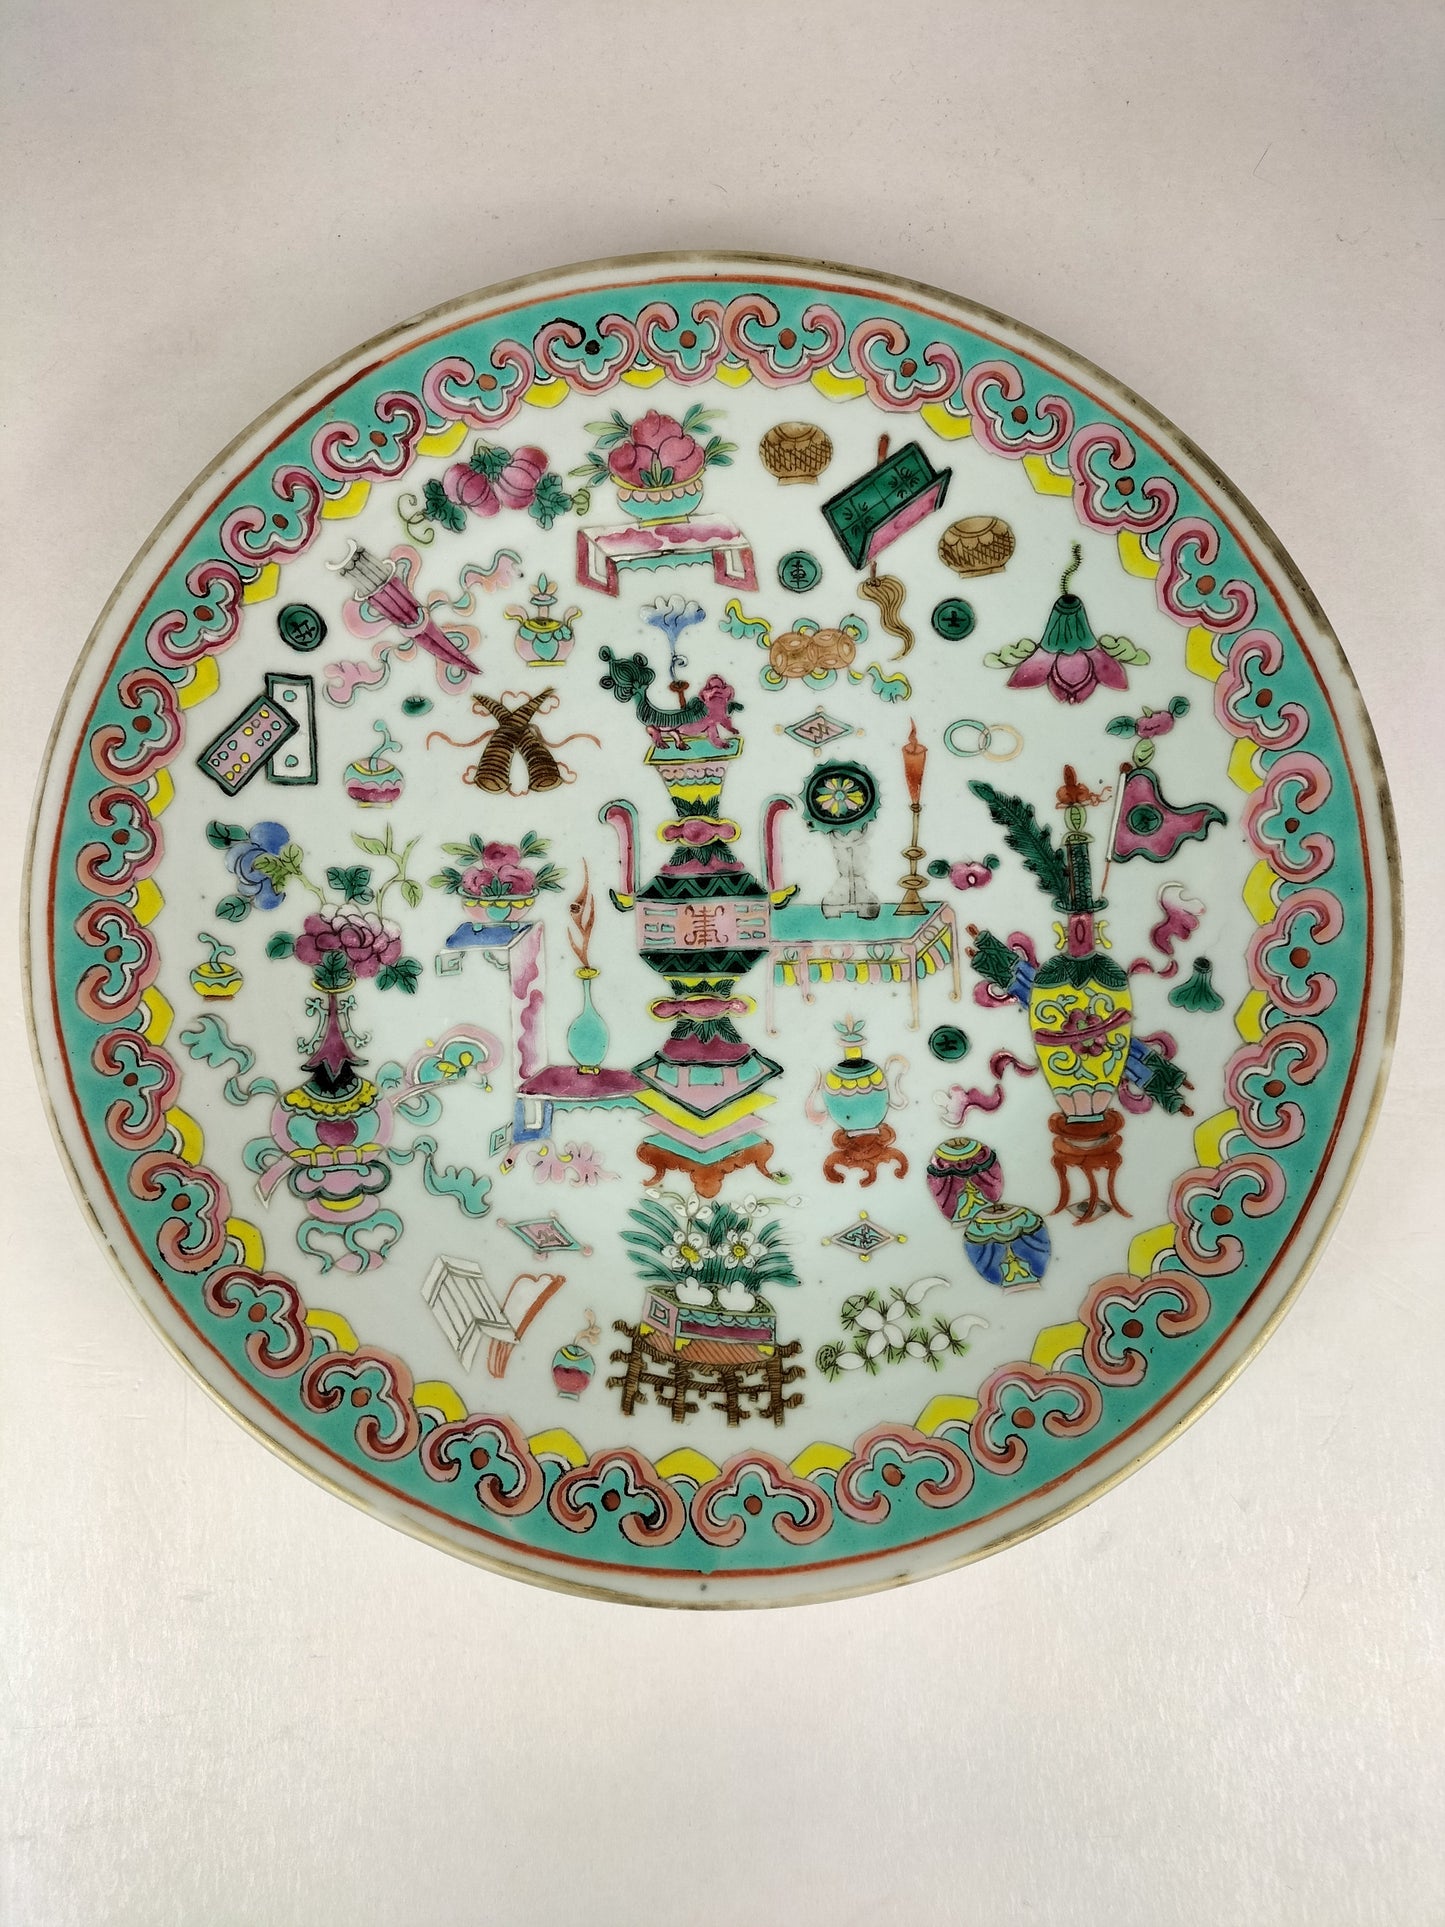 Large antique Chinese famille rose plate decorated with "100 treasures" // Qing Dynasty - 19th century